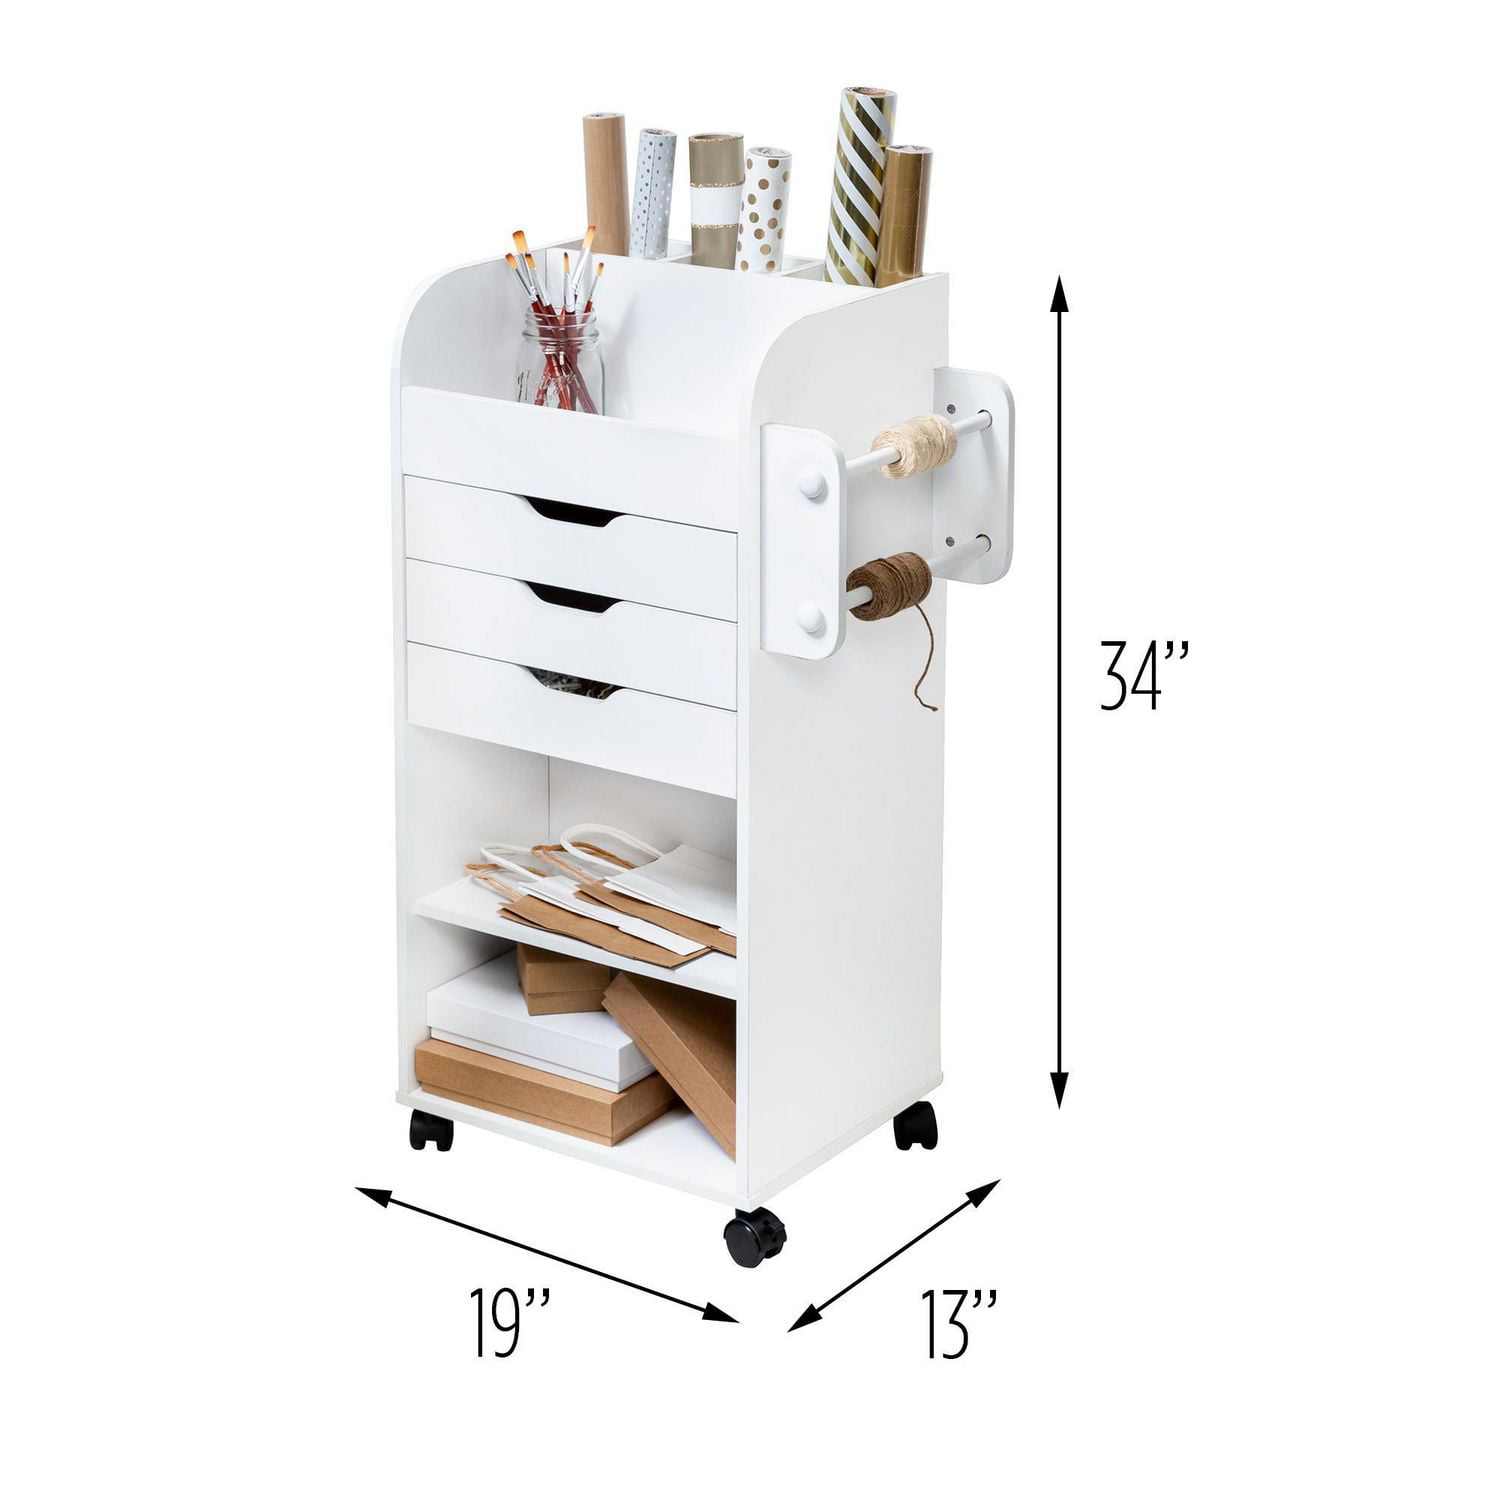 Honey-Can-Do Rolling Craft Storage Cart, White 